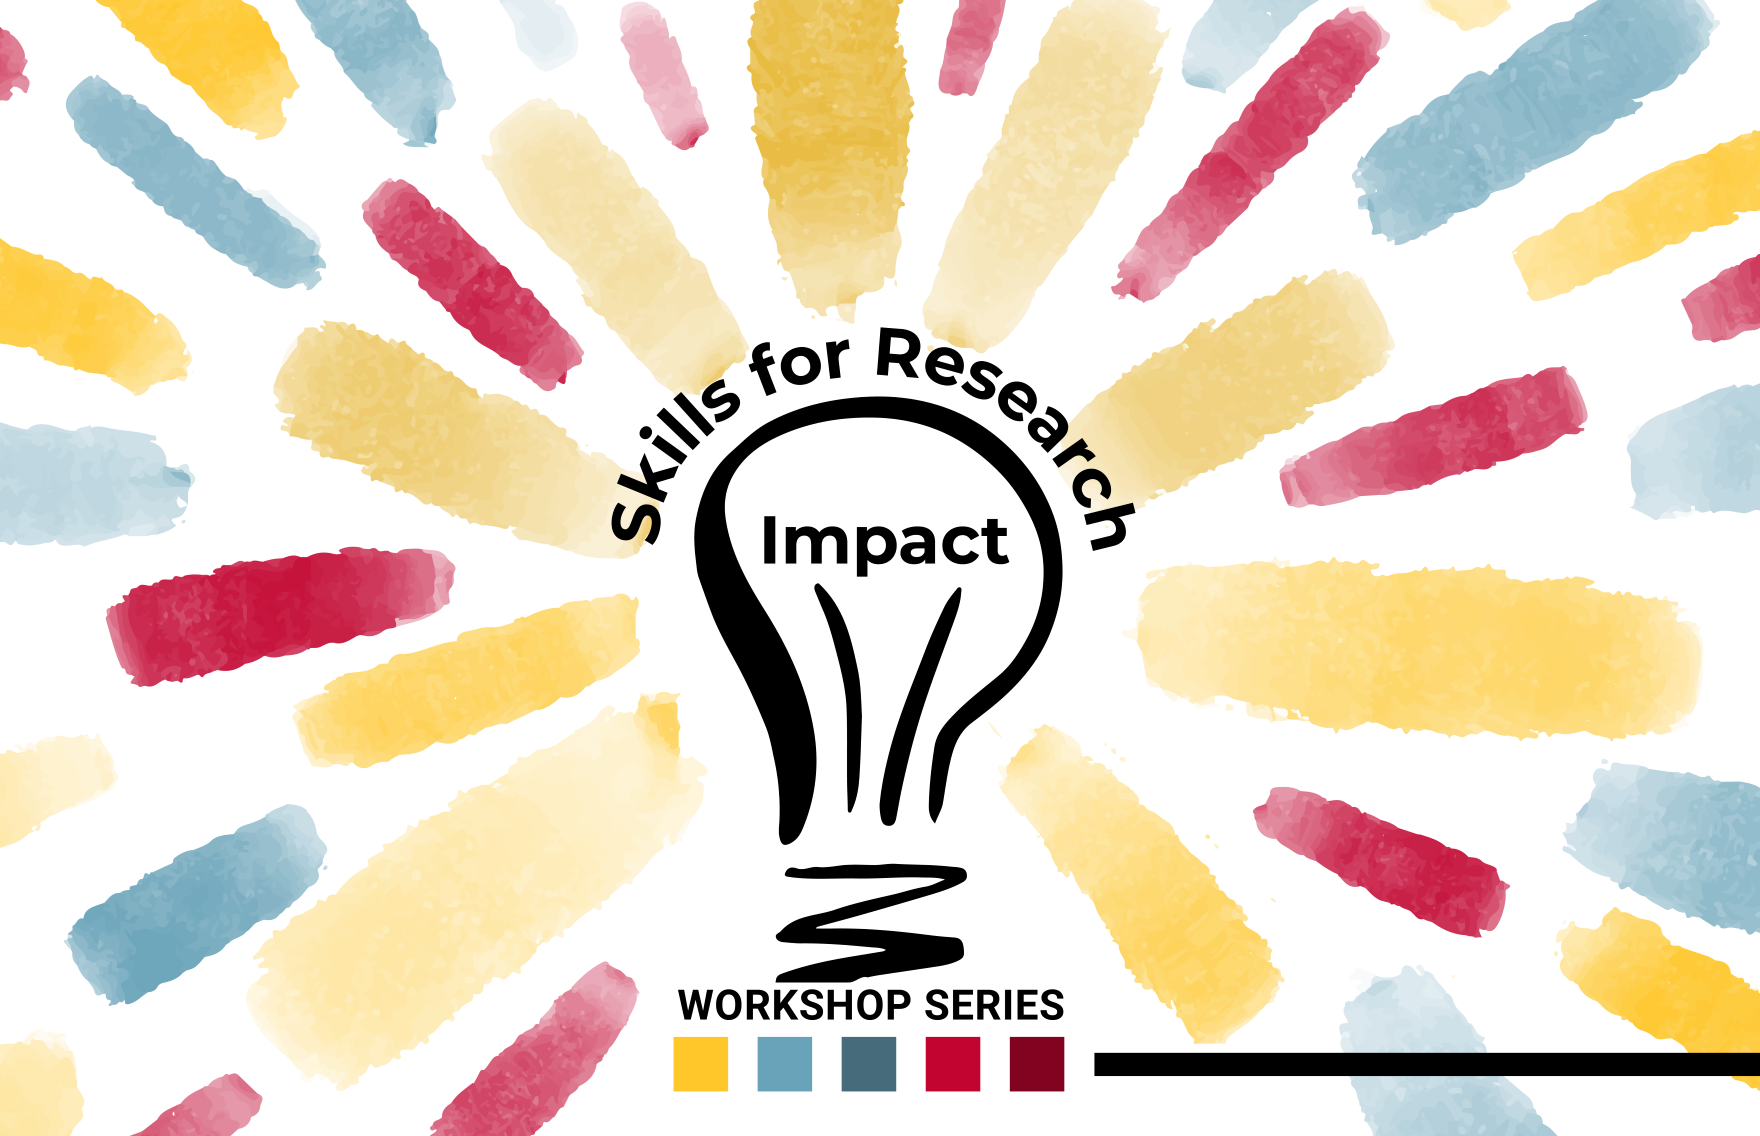 Skills for research impact. Workshop series. A lightbulb.